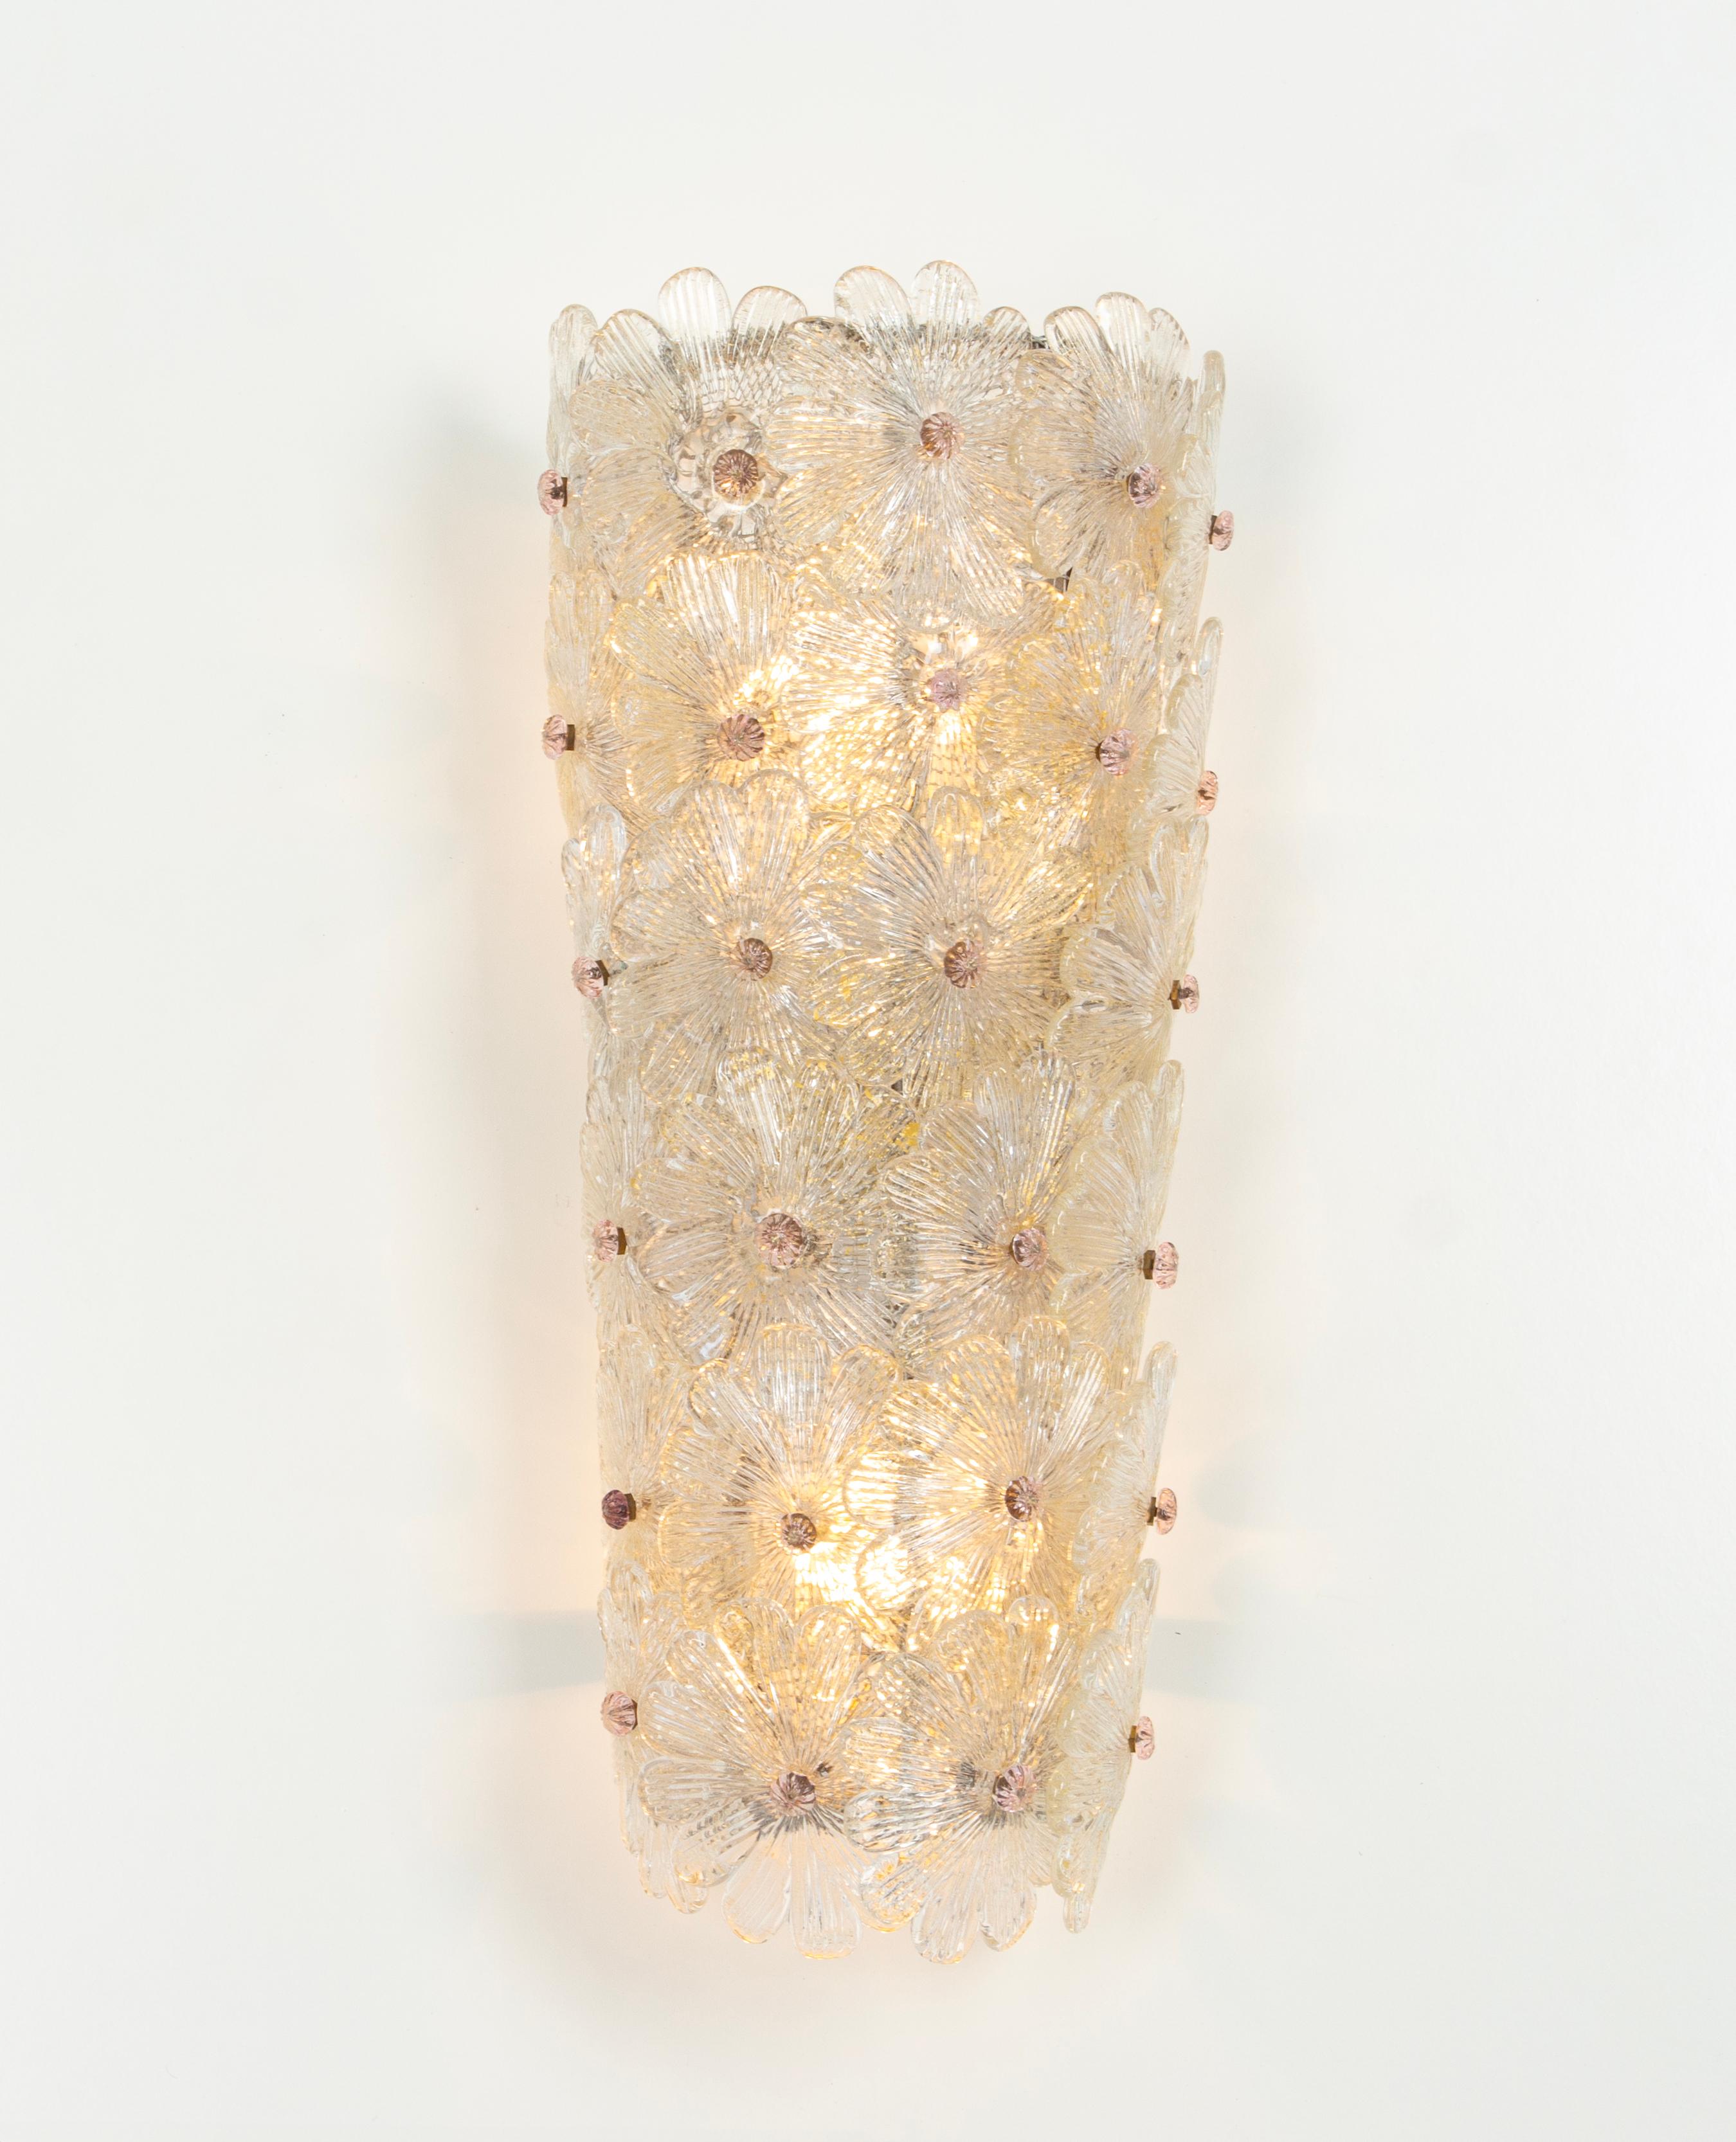 Single Large Murano Glass Wall Sconce by Barovier & Toso, Italy, 1970s For Sale 3